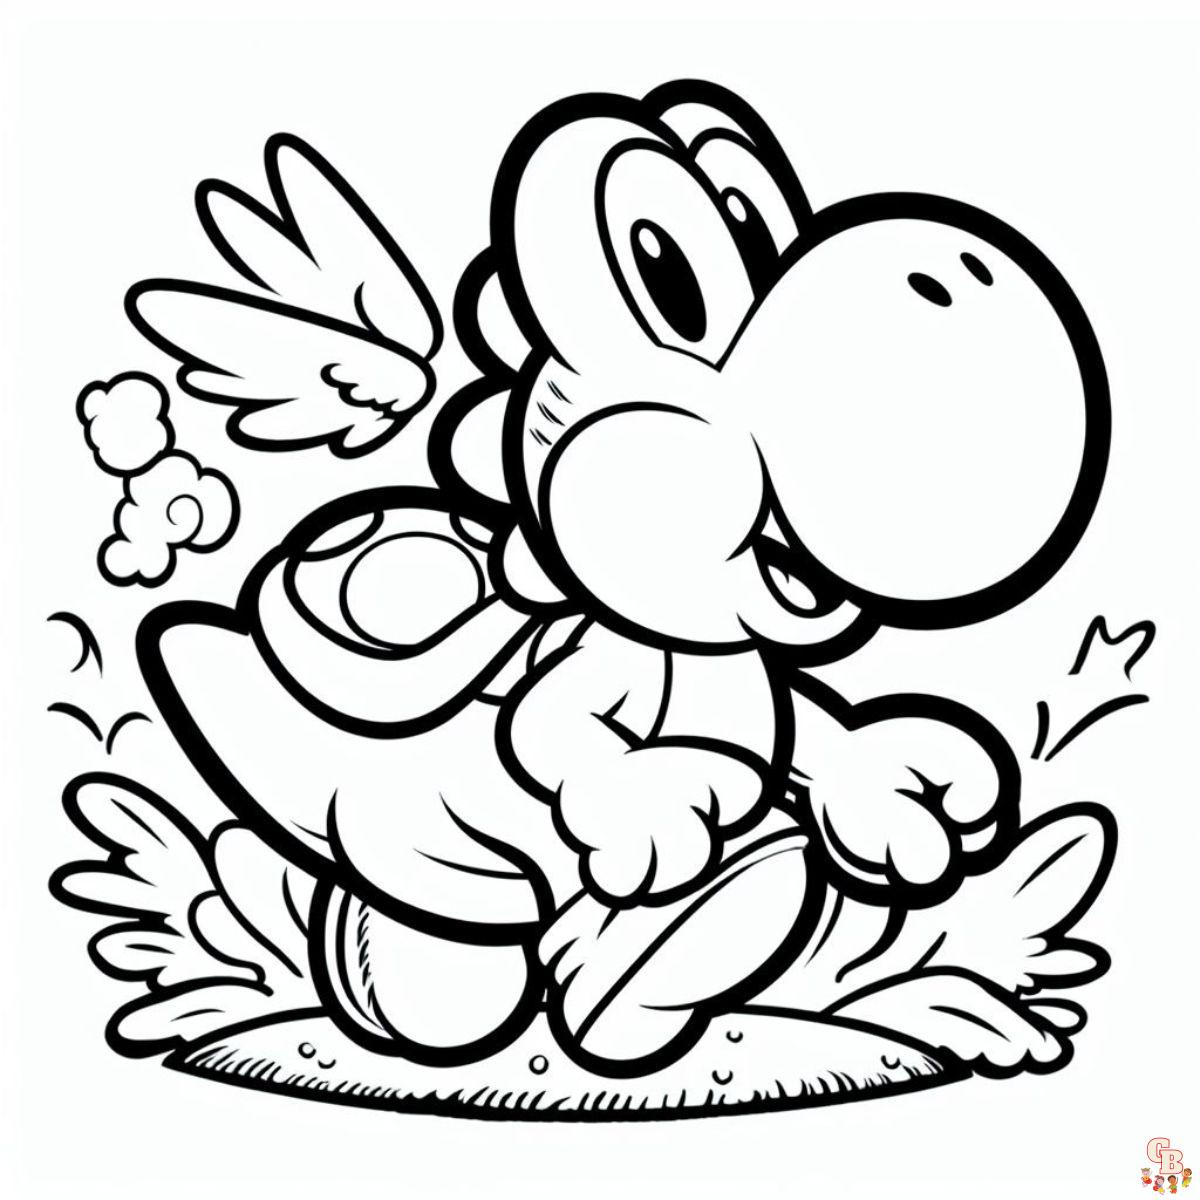 yoshi coloring pages